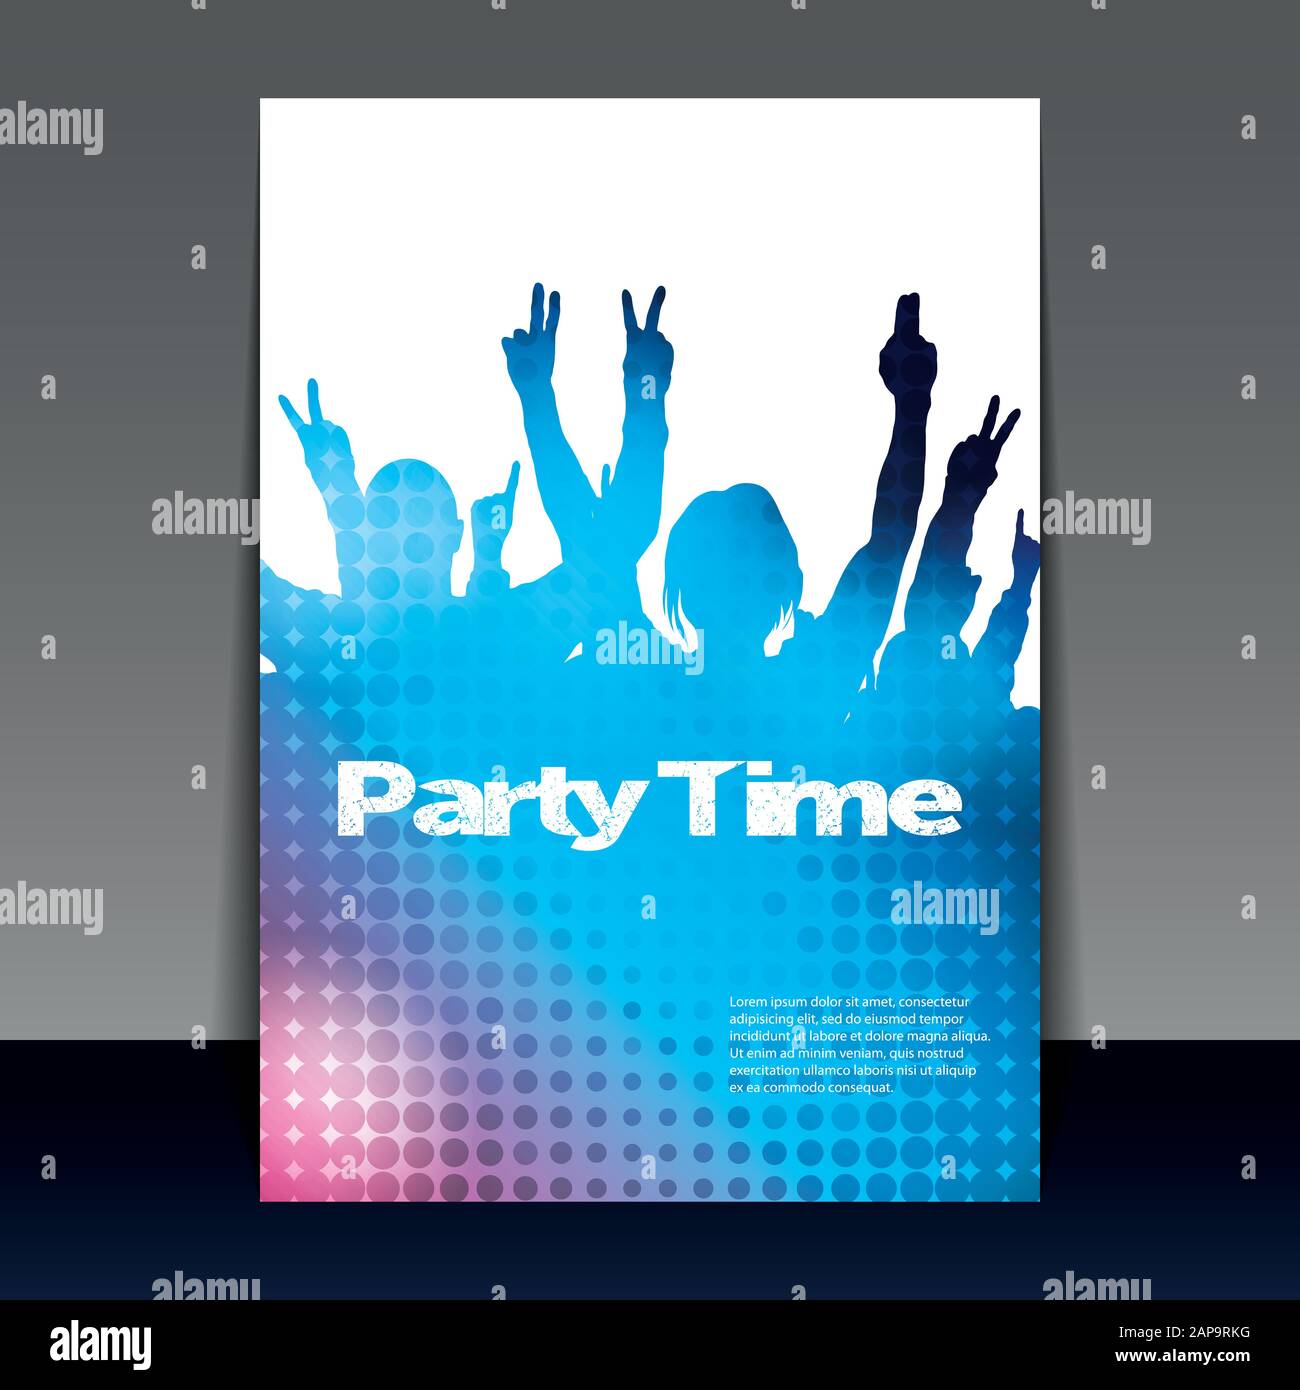 Colorful Party Flyer, Background or Book Cover with Bright Light, Dancing Disco Crowd, People in the Dark, Silhouettes with Waving Hands, Vector Stock Vector